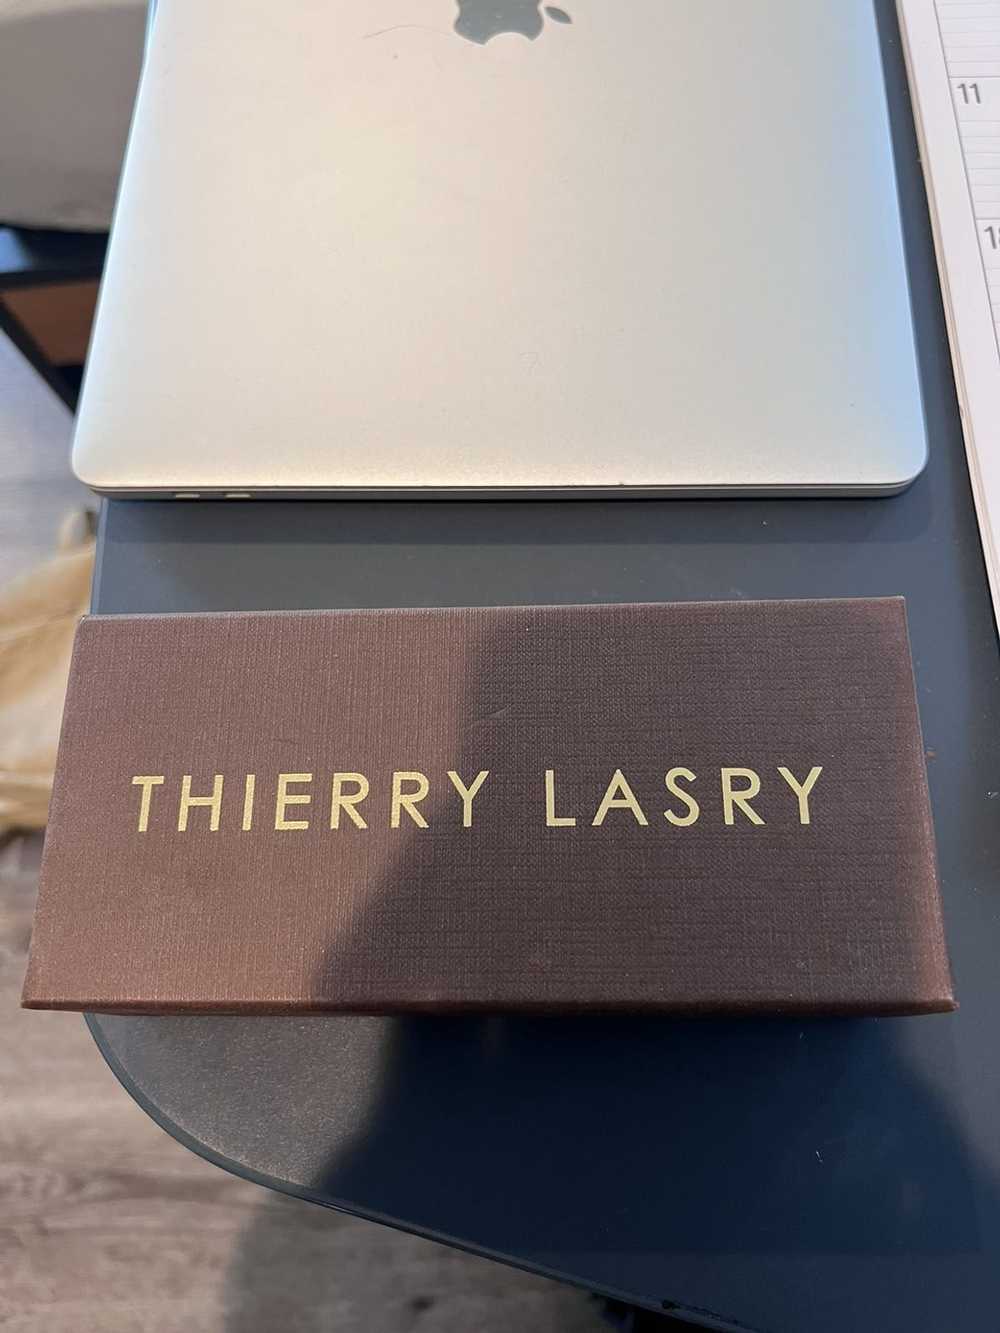 Thierry Lasry Thierry Lasry Sunglasses - image 5